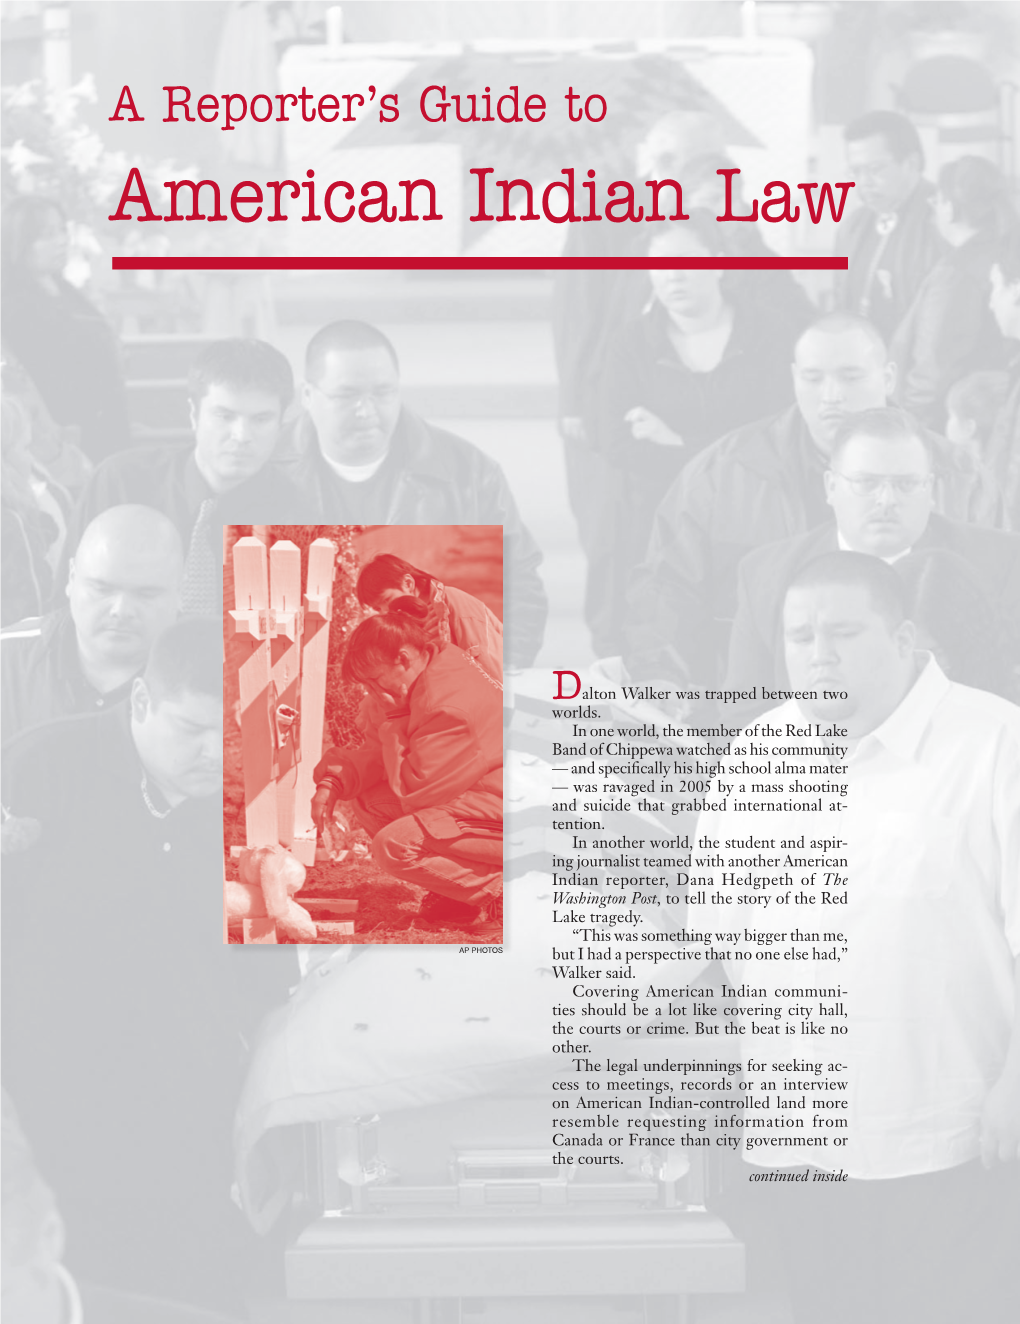 A Reporter's Guide to American Indian